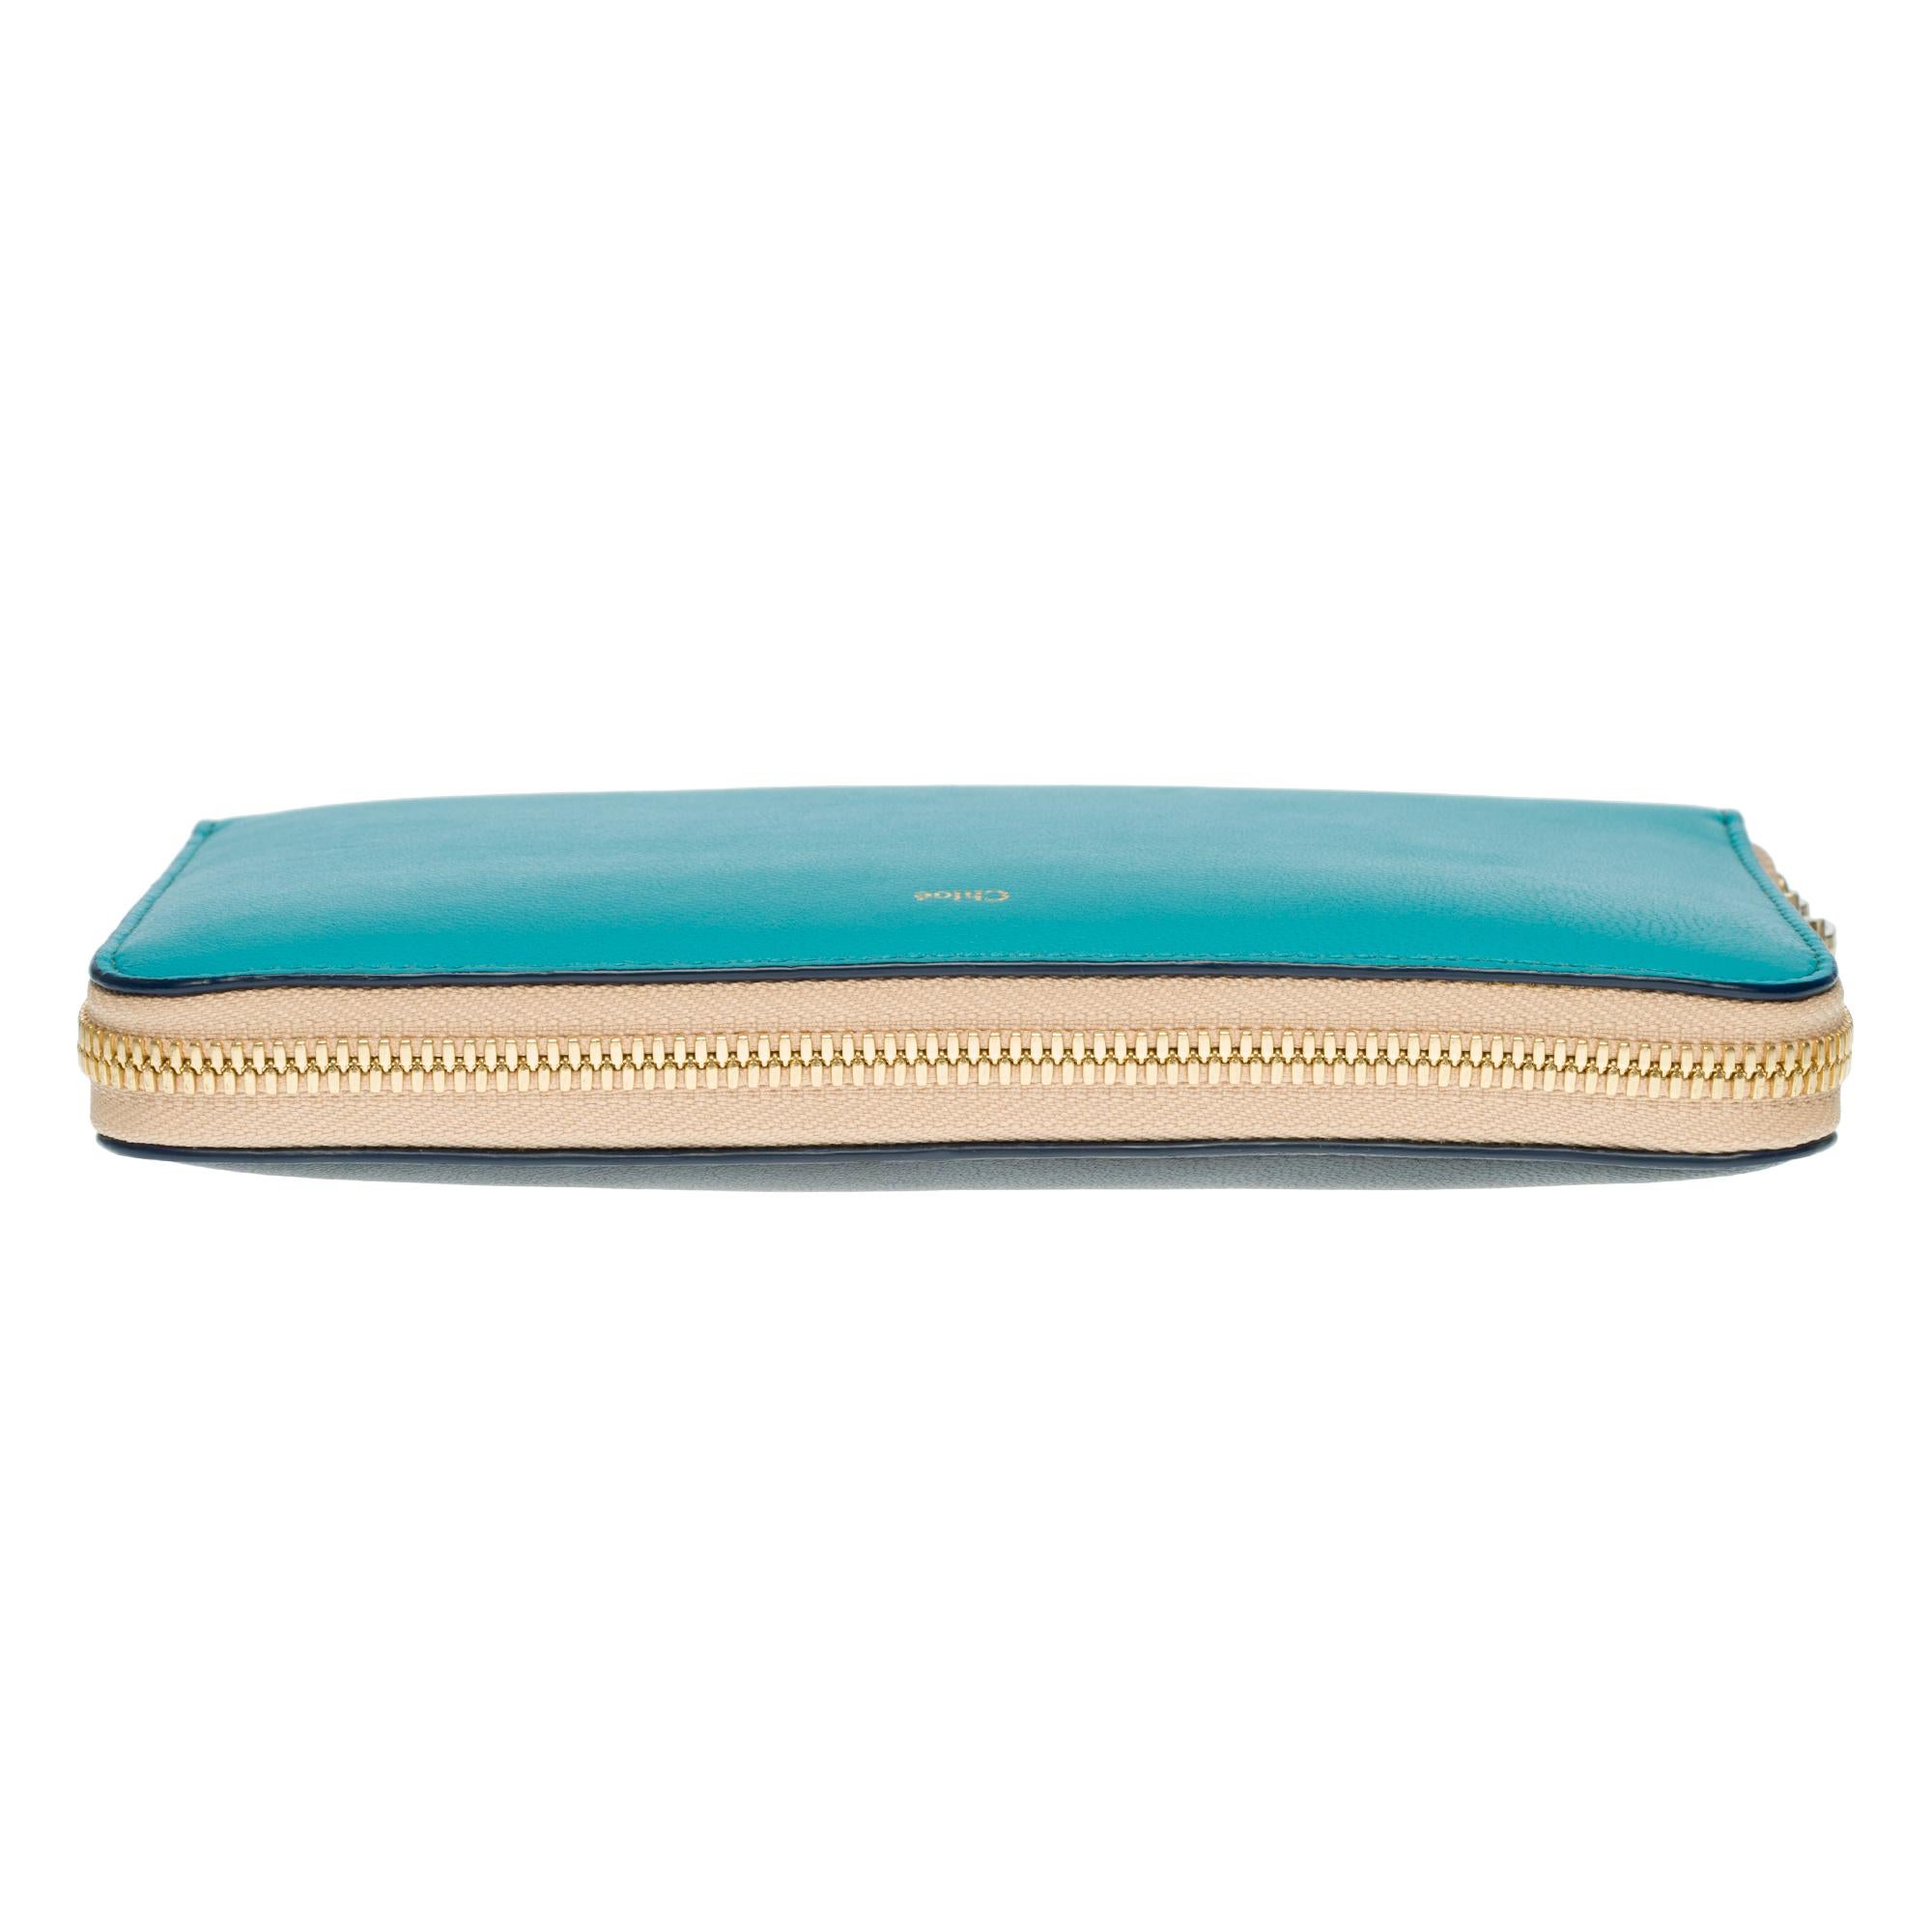 Charming Chloé bicolor wallet in turquoise and black leather with gold hardware 3